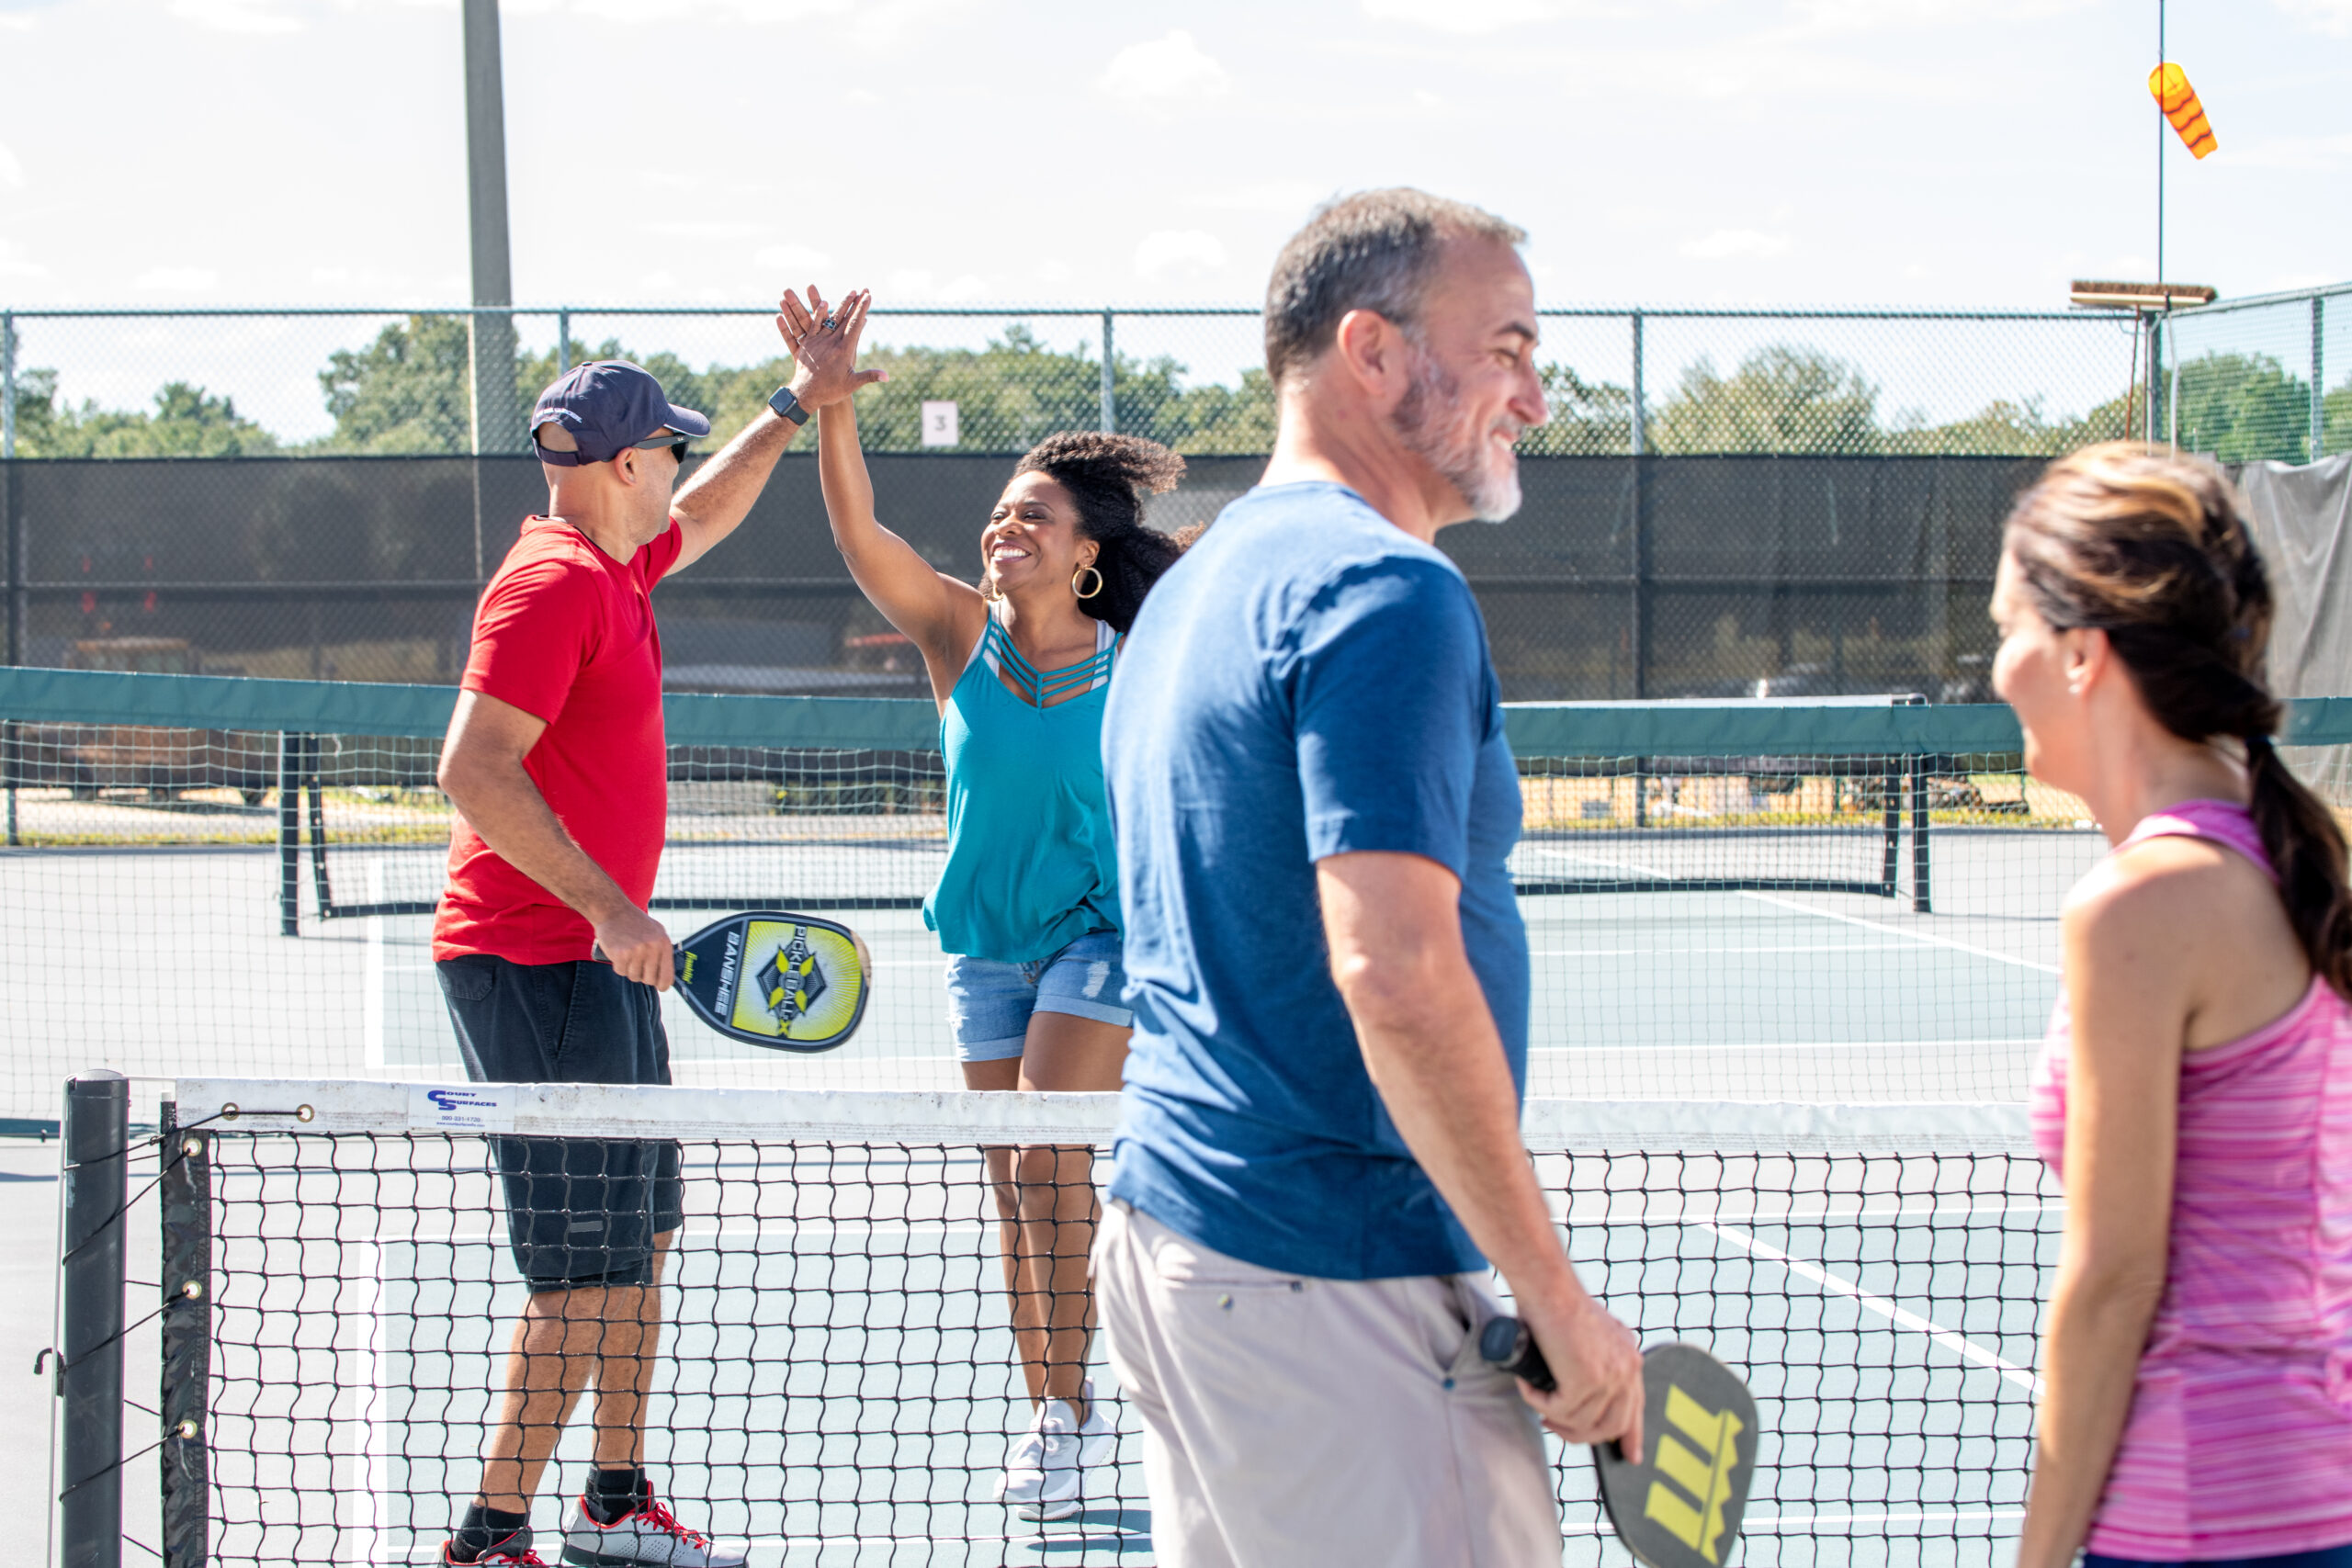 Two people celebrating a win playing pickleball